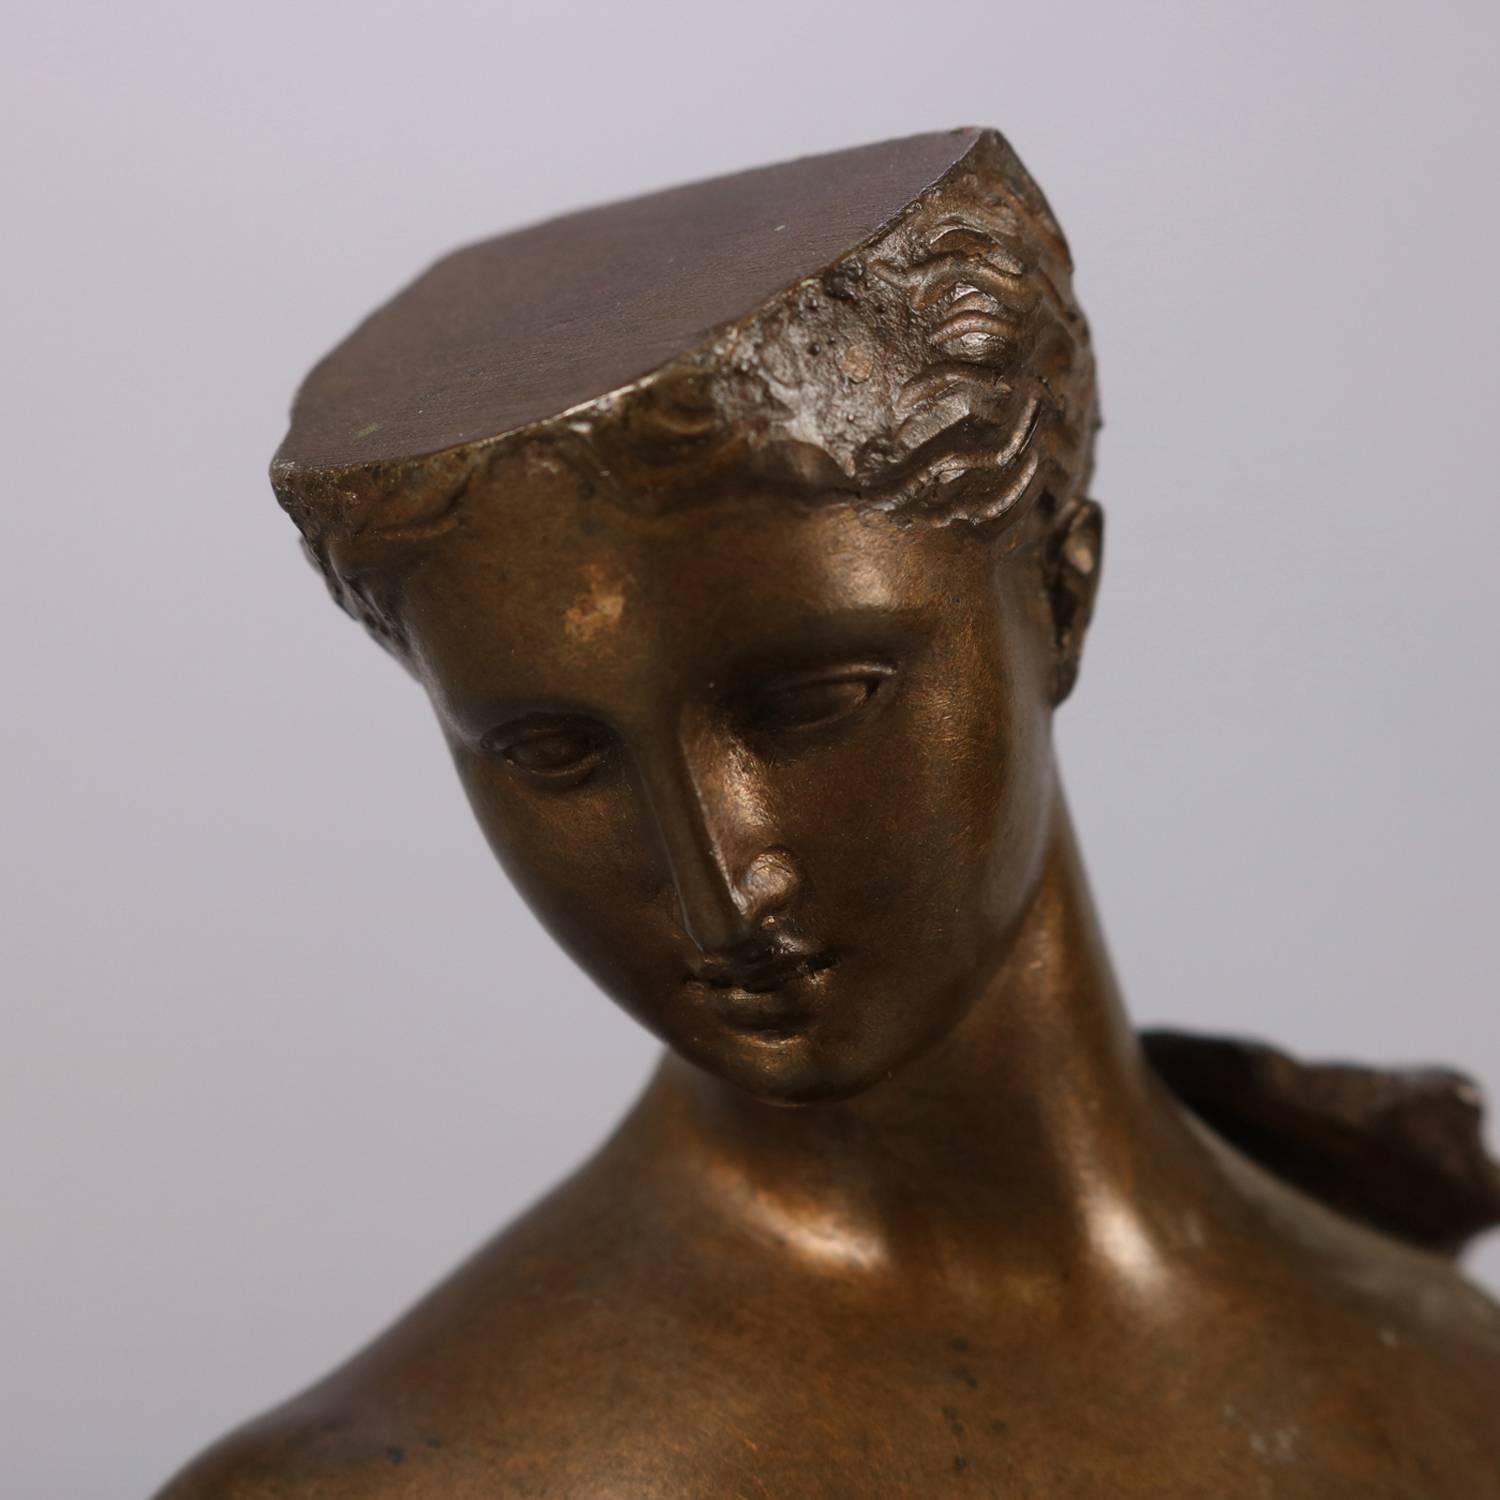 Antique bronzed unfinished 3/4 sculpture portrait of partial nude Classical woman on marble base, dated 1890.

Measures: 7.75